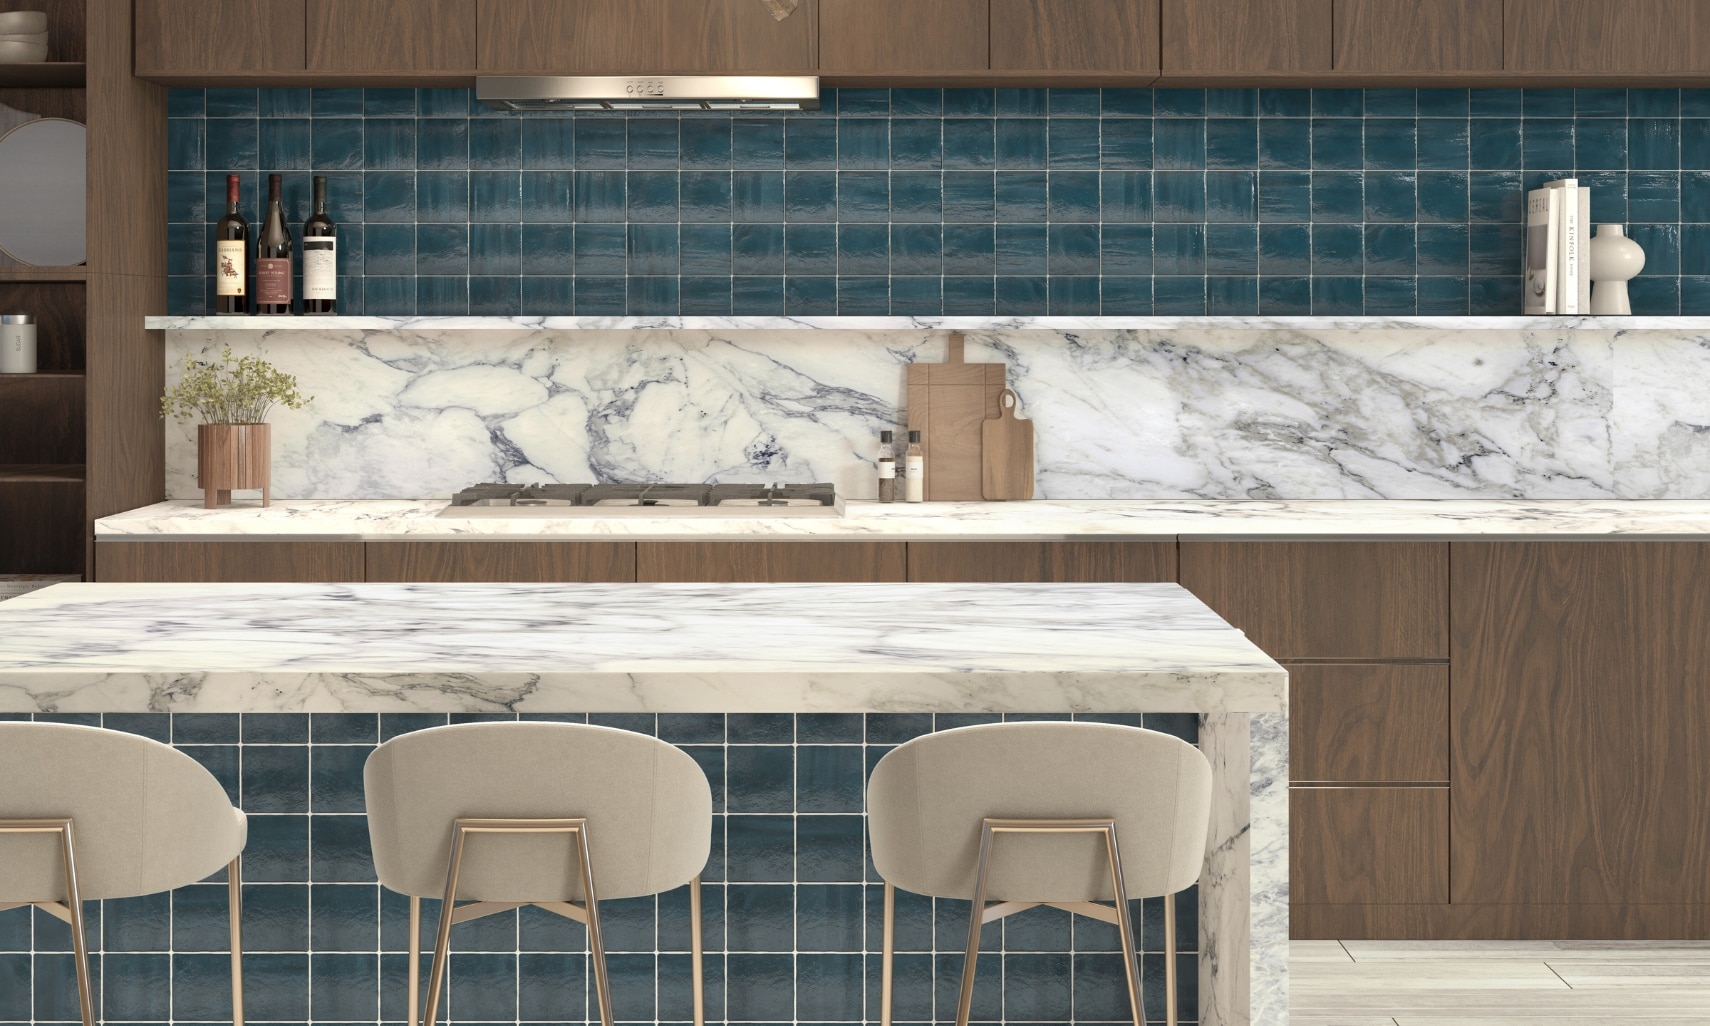 Kitchen with white and gray marble waterfall island, countertop, and half backsplash, woodgrain cabinets, glossy blue wall tile on backsplash and face of island.